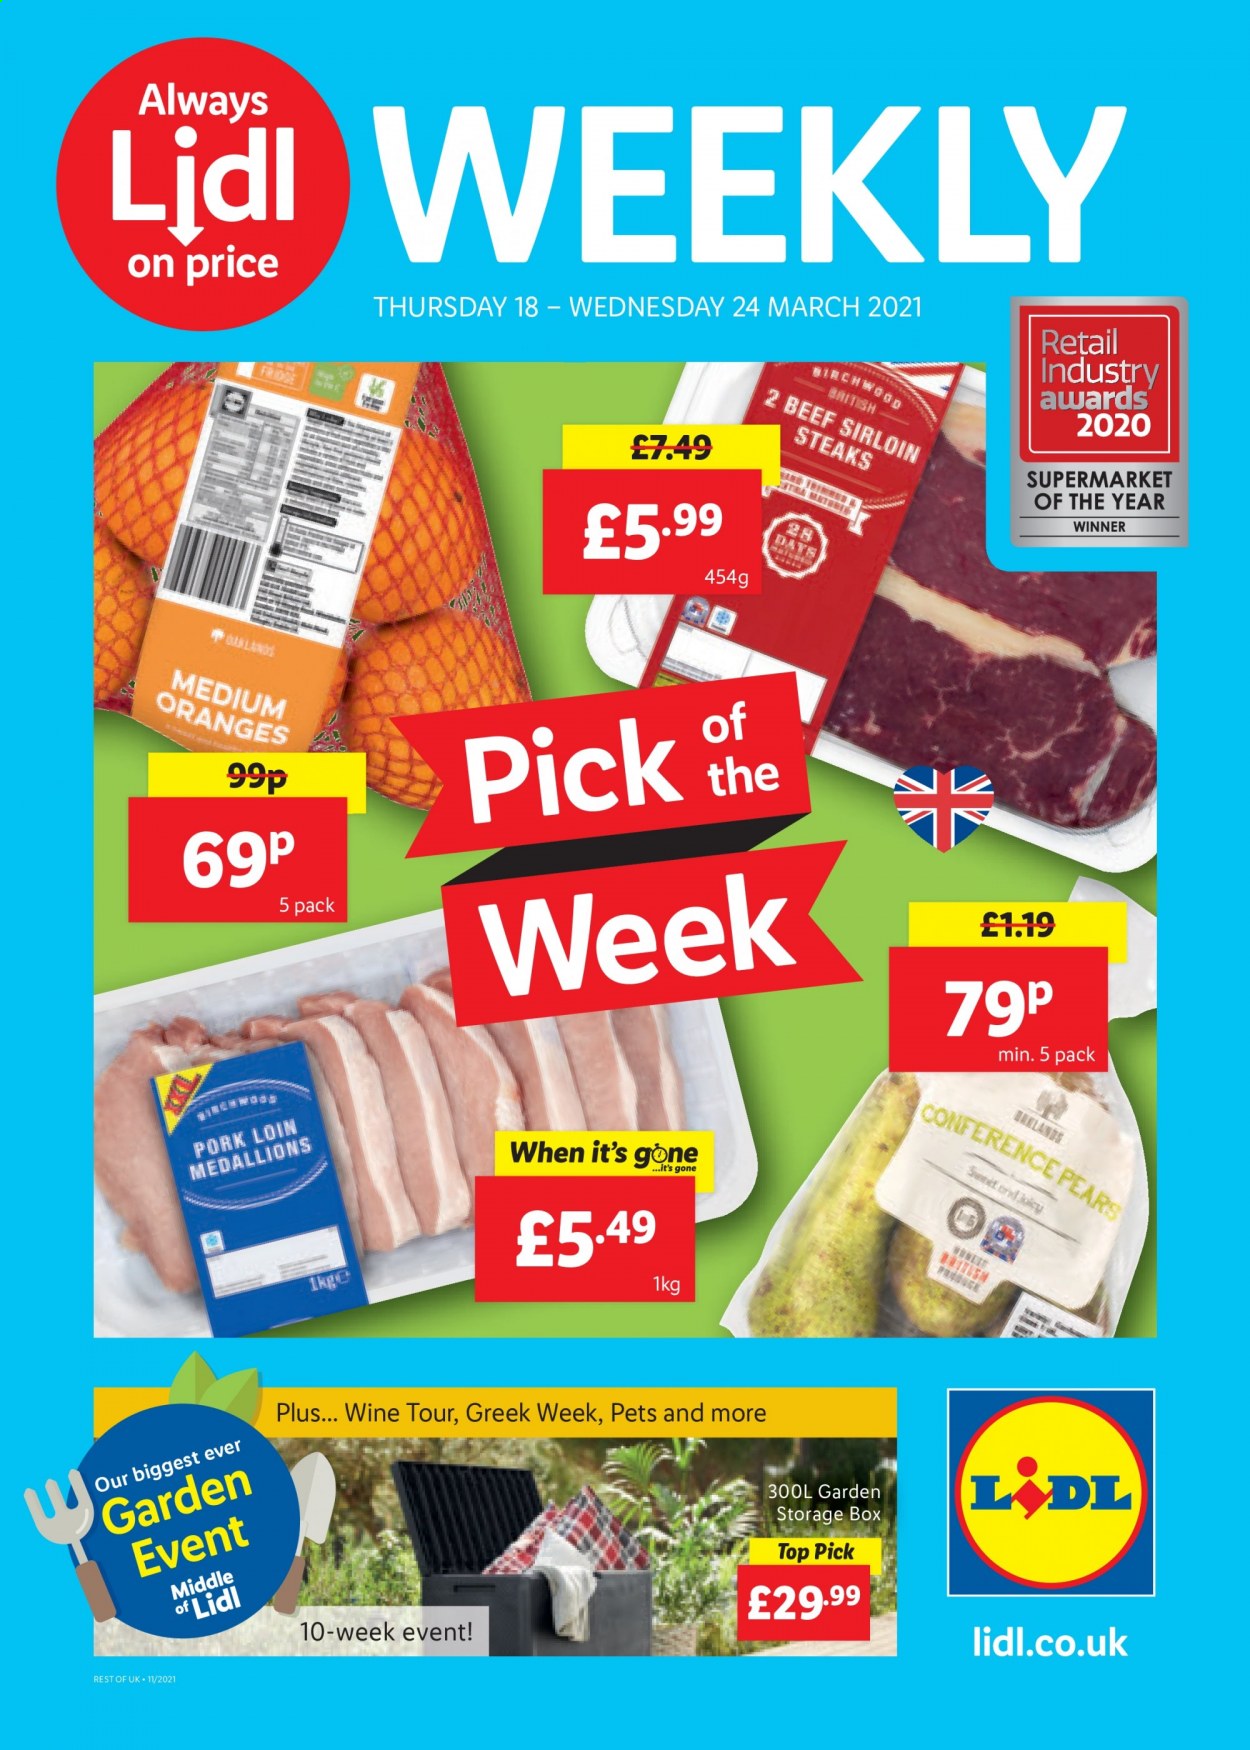 thumbnail - Lidl offer  - 18/03/2021 - 24/03/2021 - Sales products - storage box, pears, oranges, beef meat, beef sirloin, steak, pork loin, pork meat, wine. Page 1.